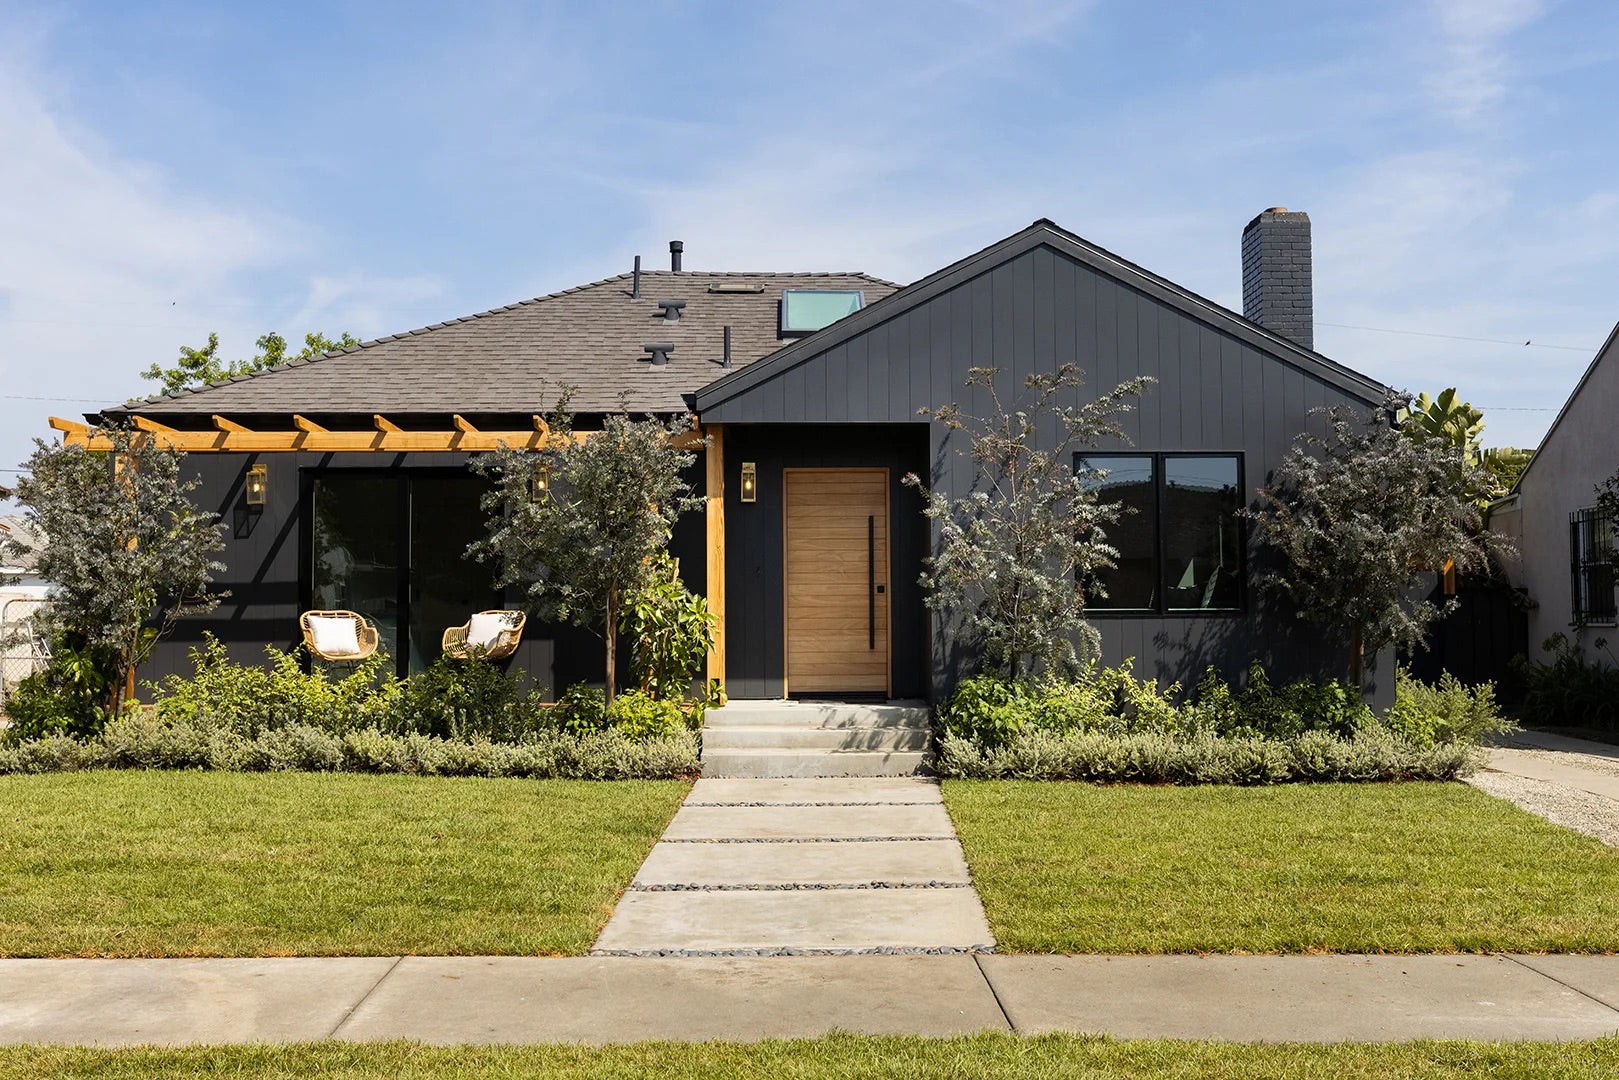 Black painted bungalow exterior with wood accents.